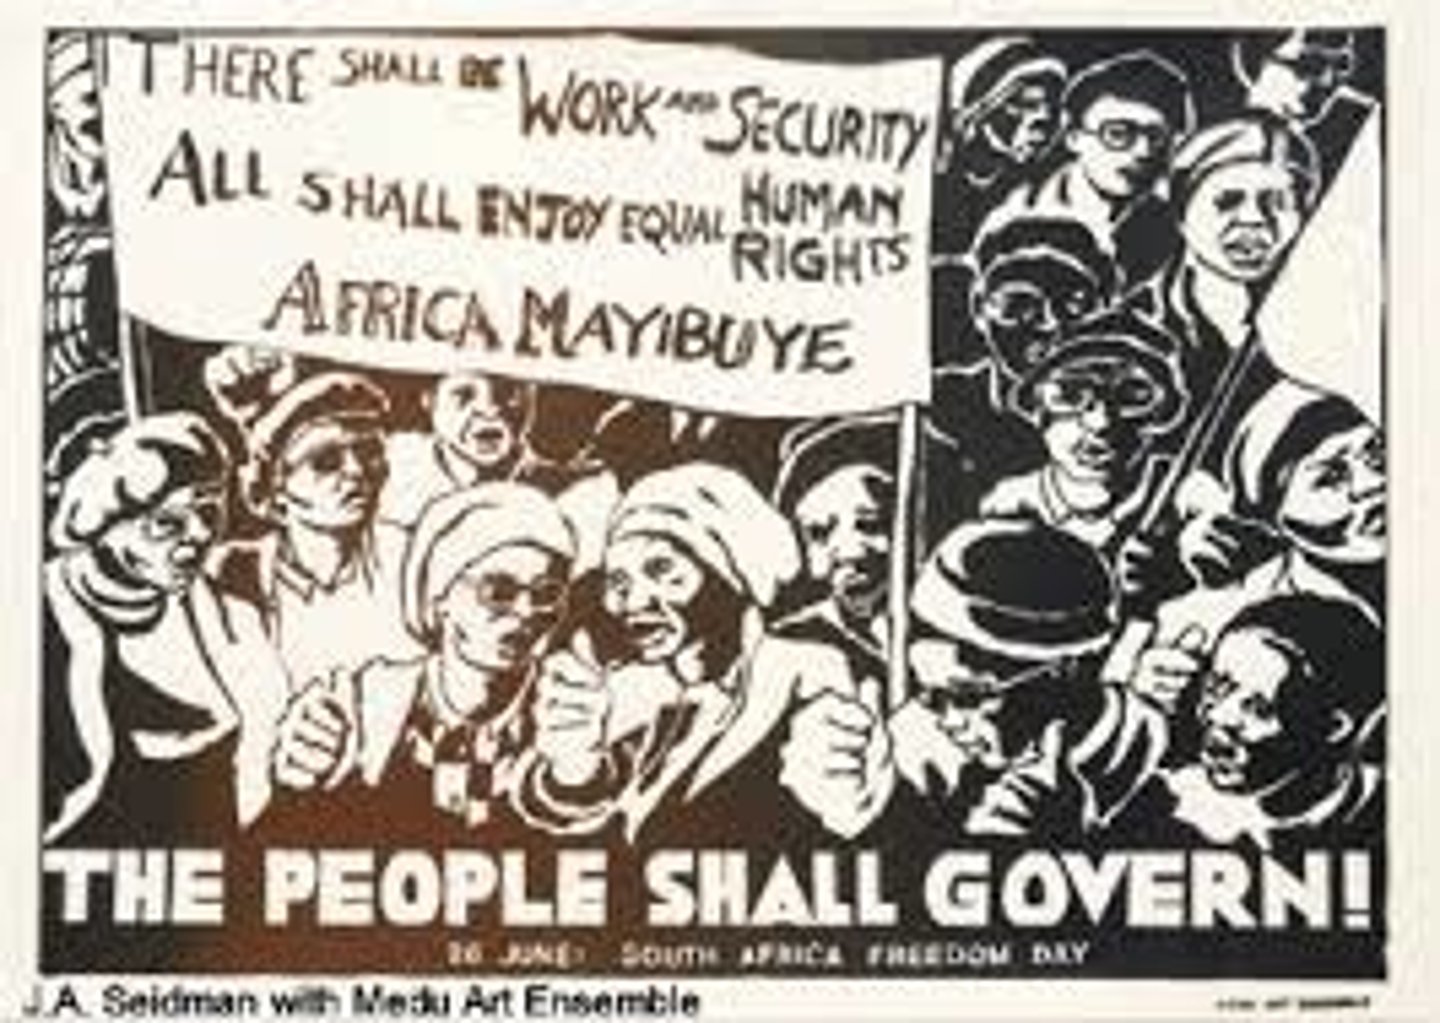 <p>Declaration of principles issued by ANC in 1956; advocated racial equality, free education and medical care, public ownership of mines, banks and big industry</p>